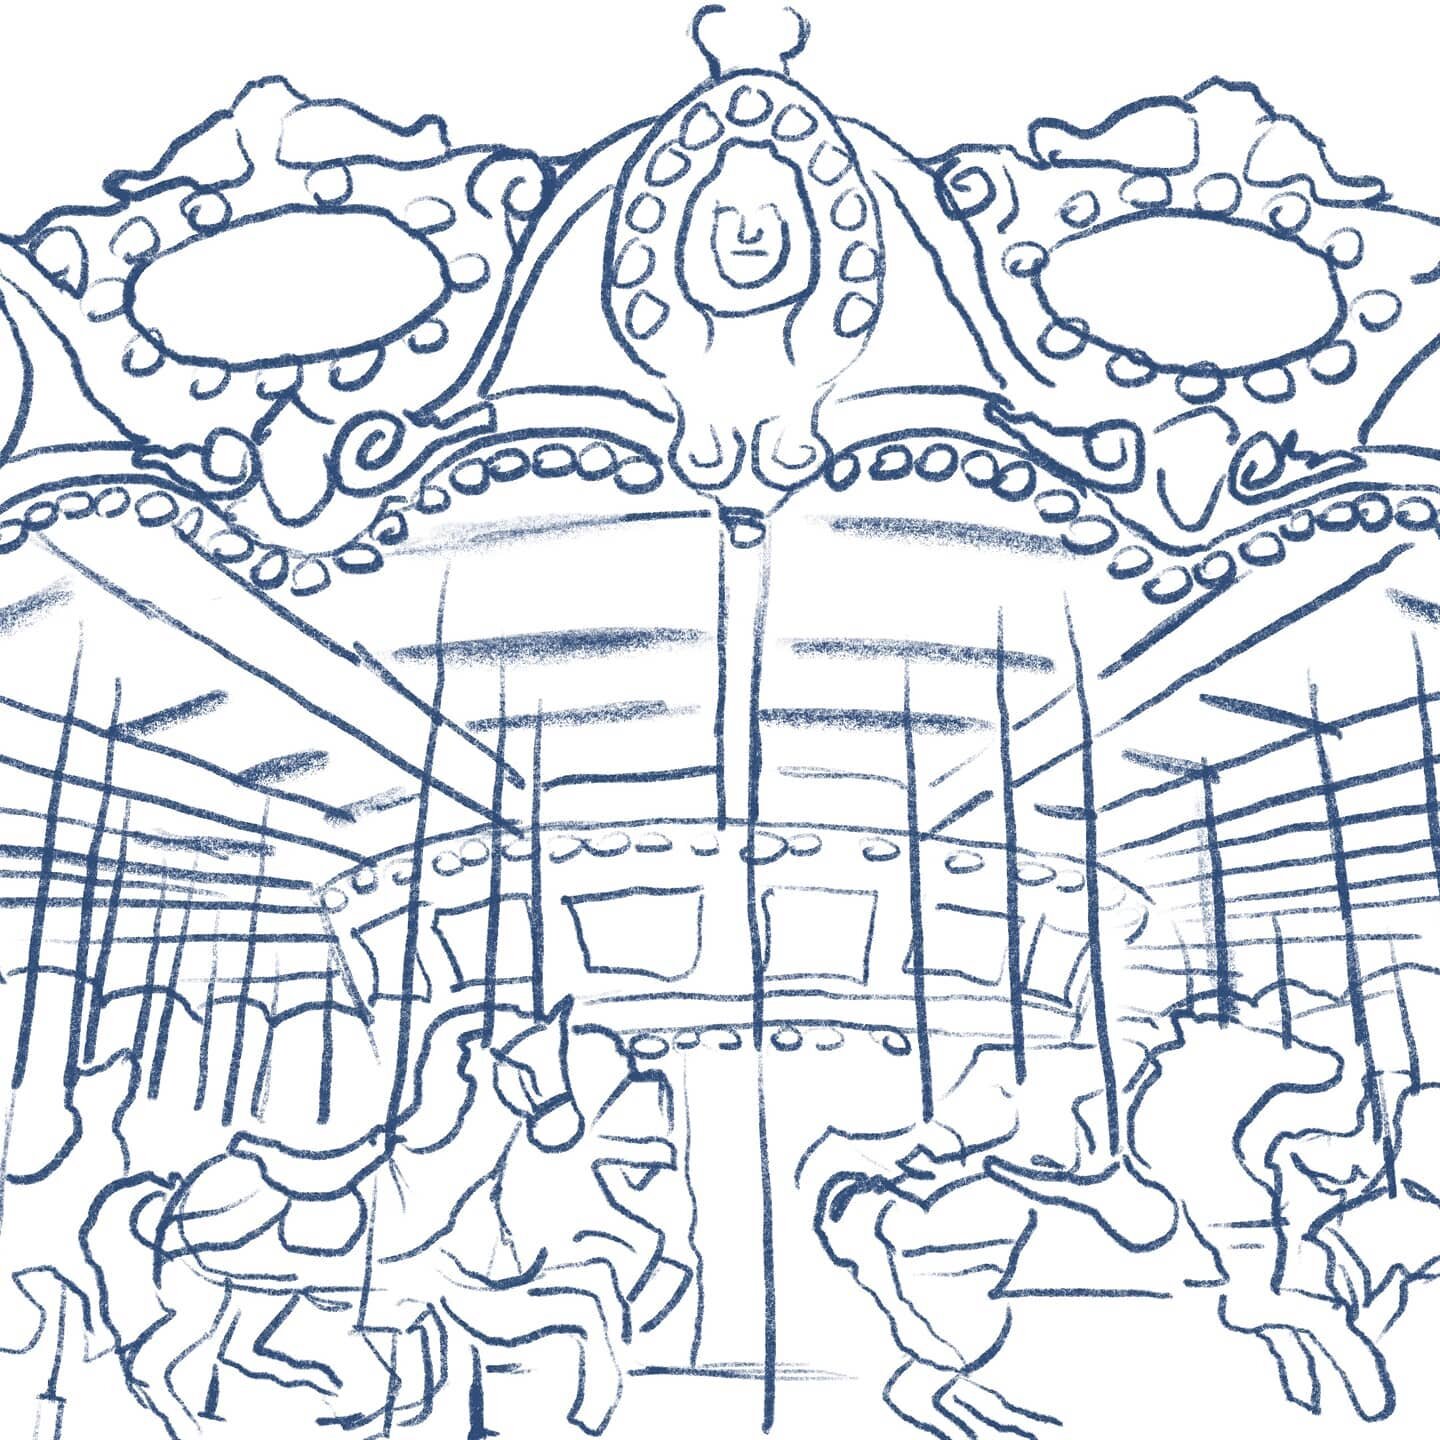 Another sketch of a work in process painting.

#only1joeyart #only1joey #art #artist #wipart #sketch #digitalsketch #fair #horses #carousel